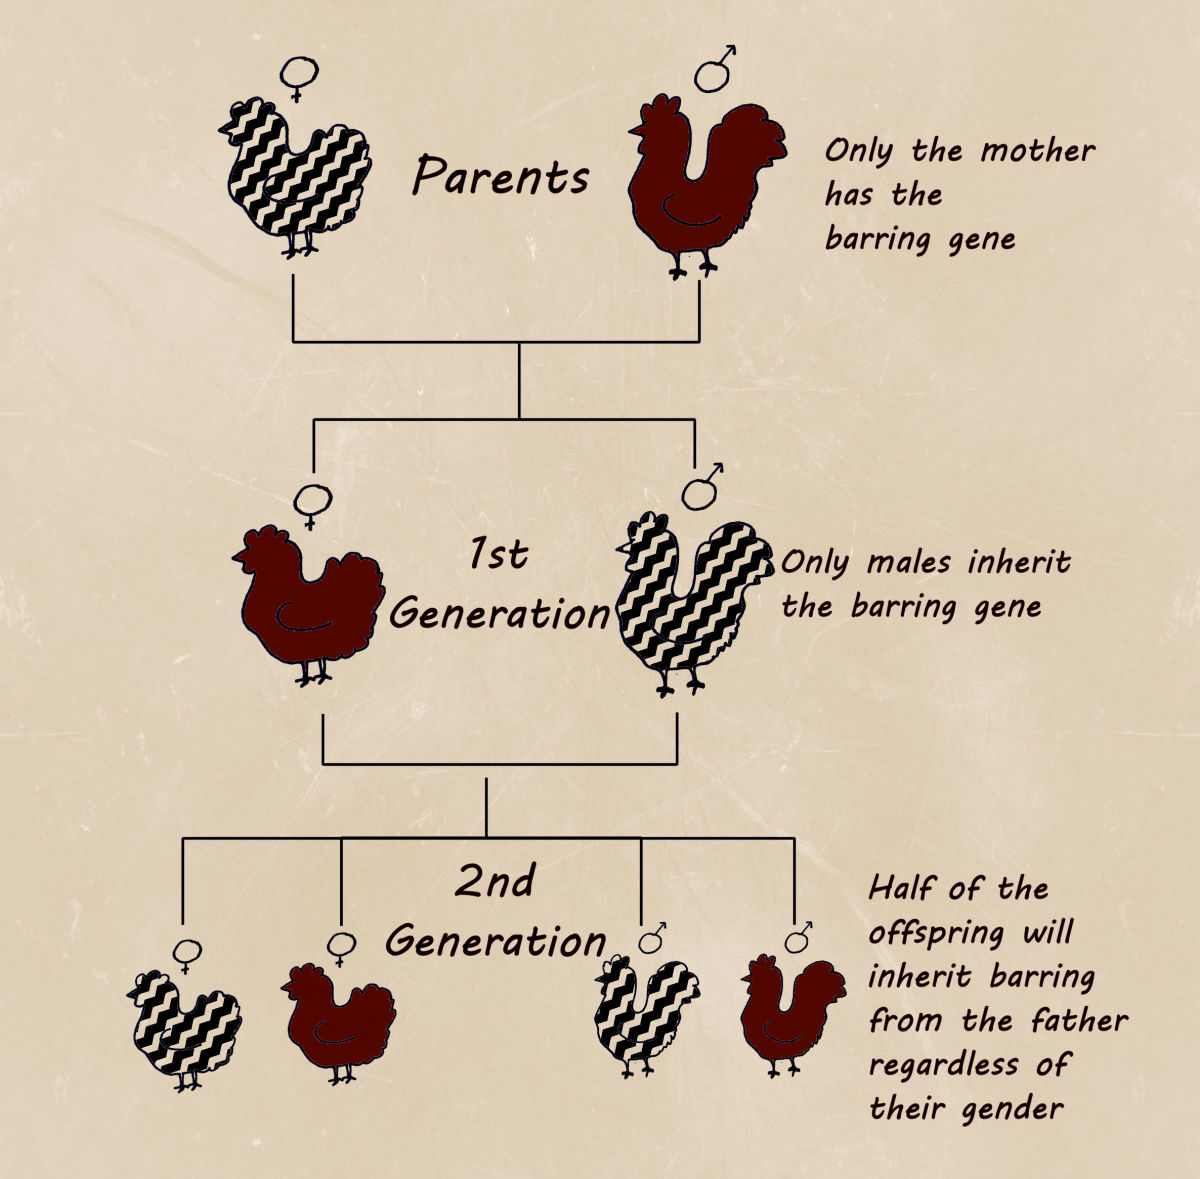 This chart demonstrates how the barring gene is passed down in a sexlink breeding project.